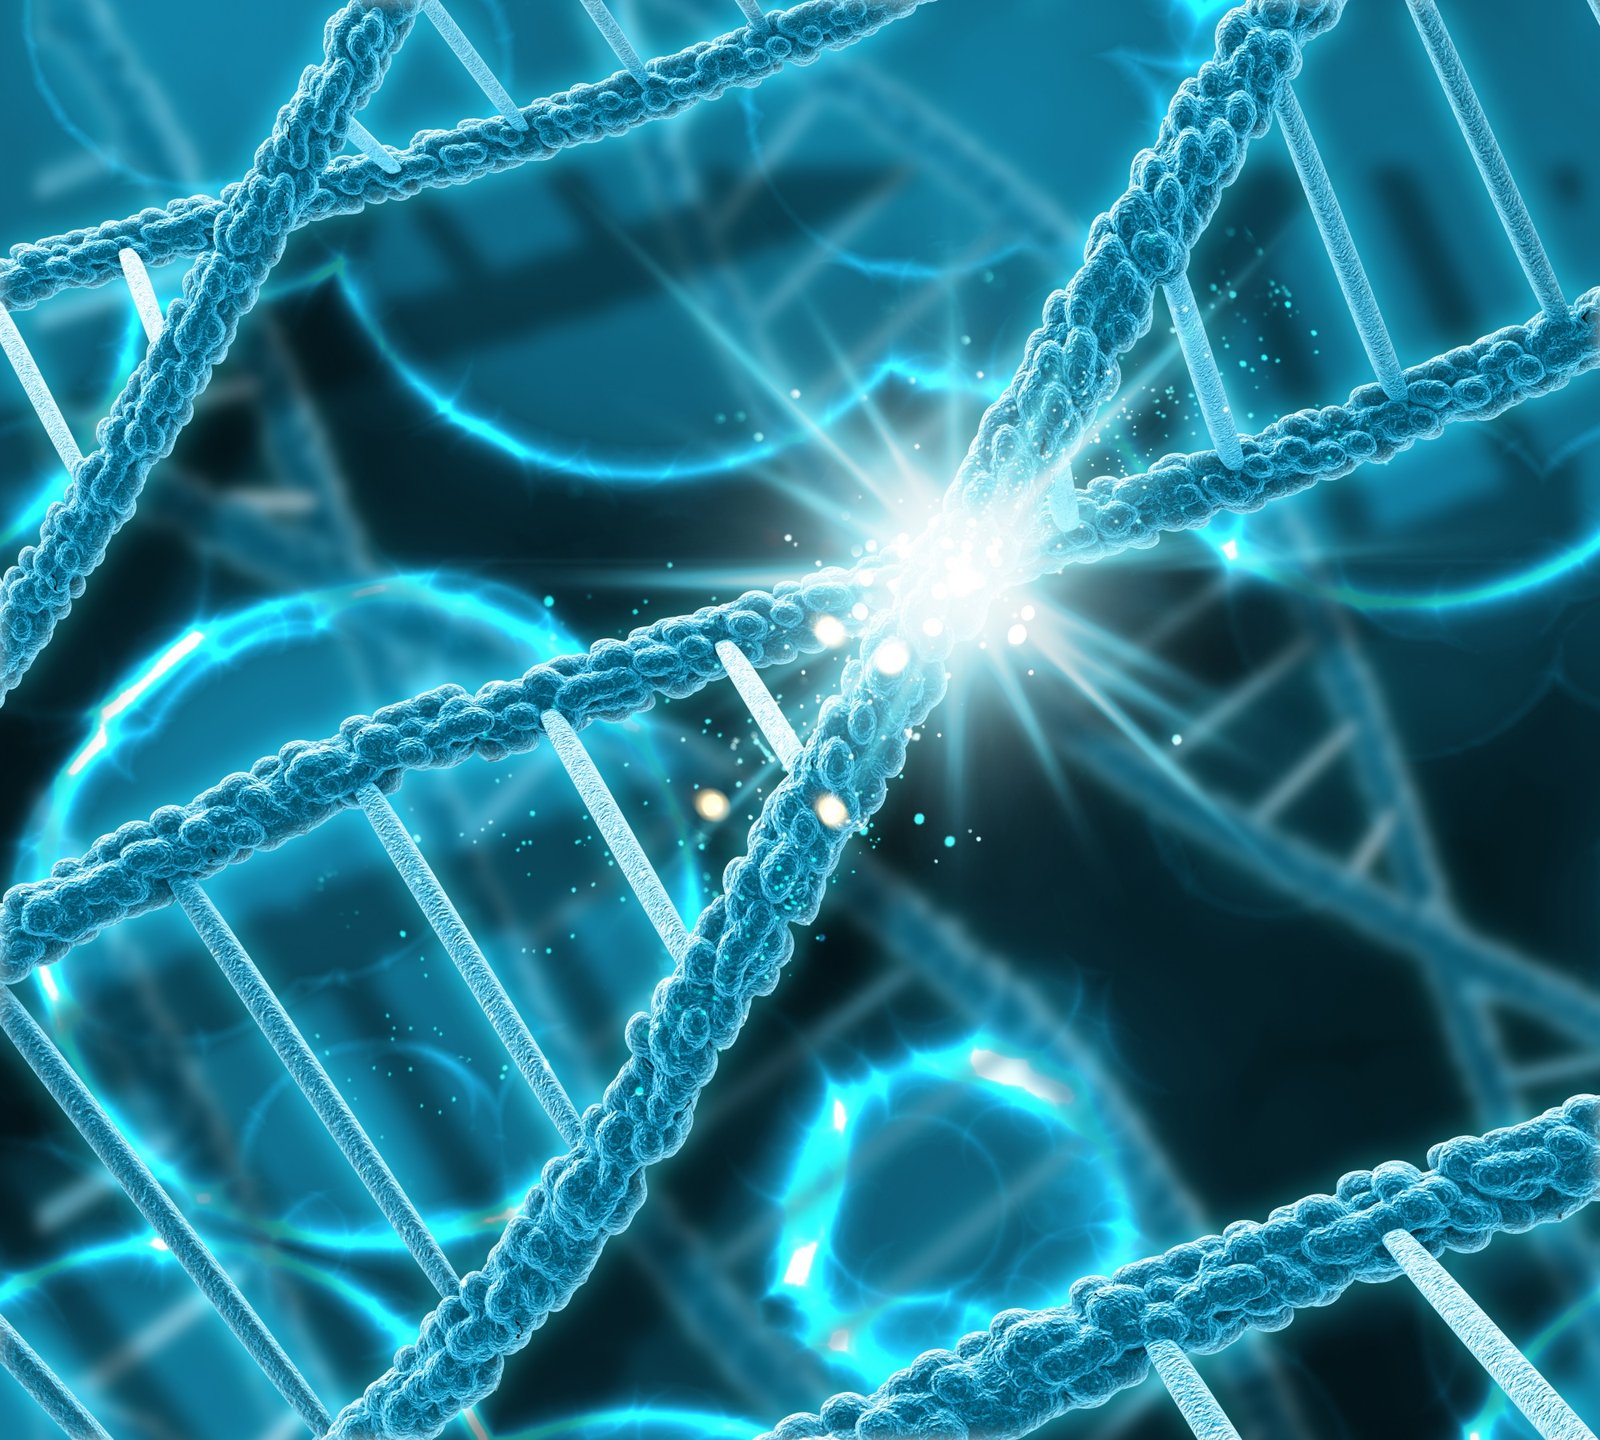 Background Image of DNA